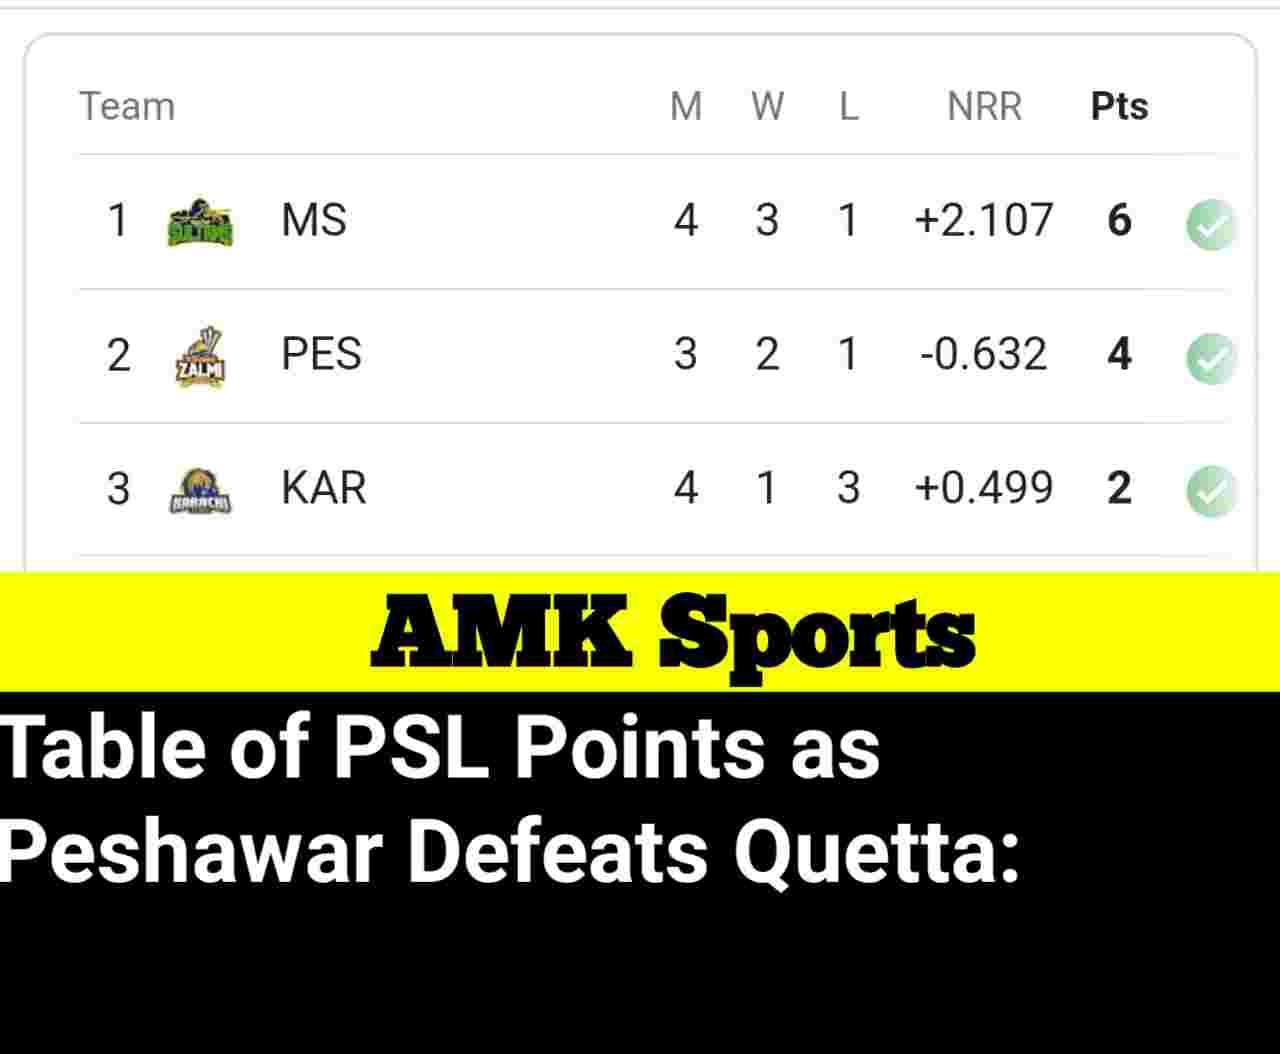 Table of PSL Points as Peshawar Defeats Quetta